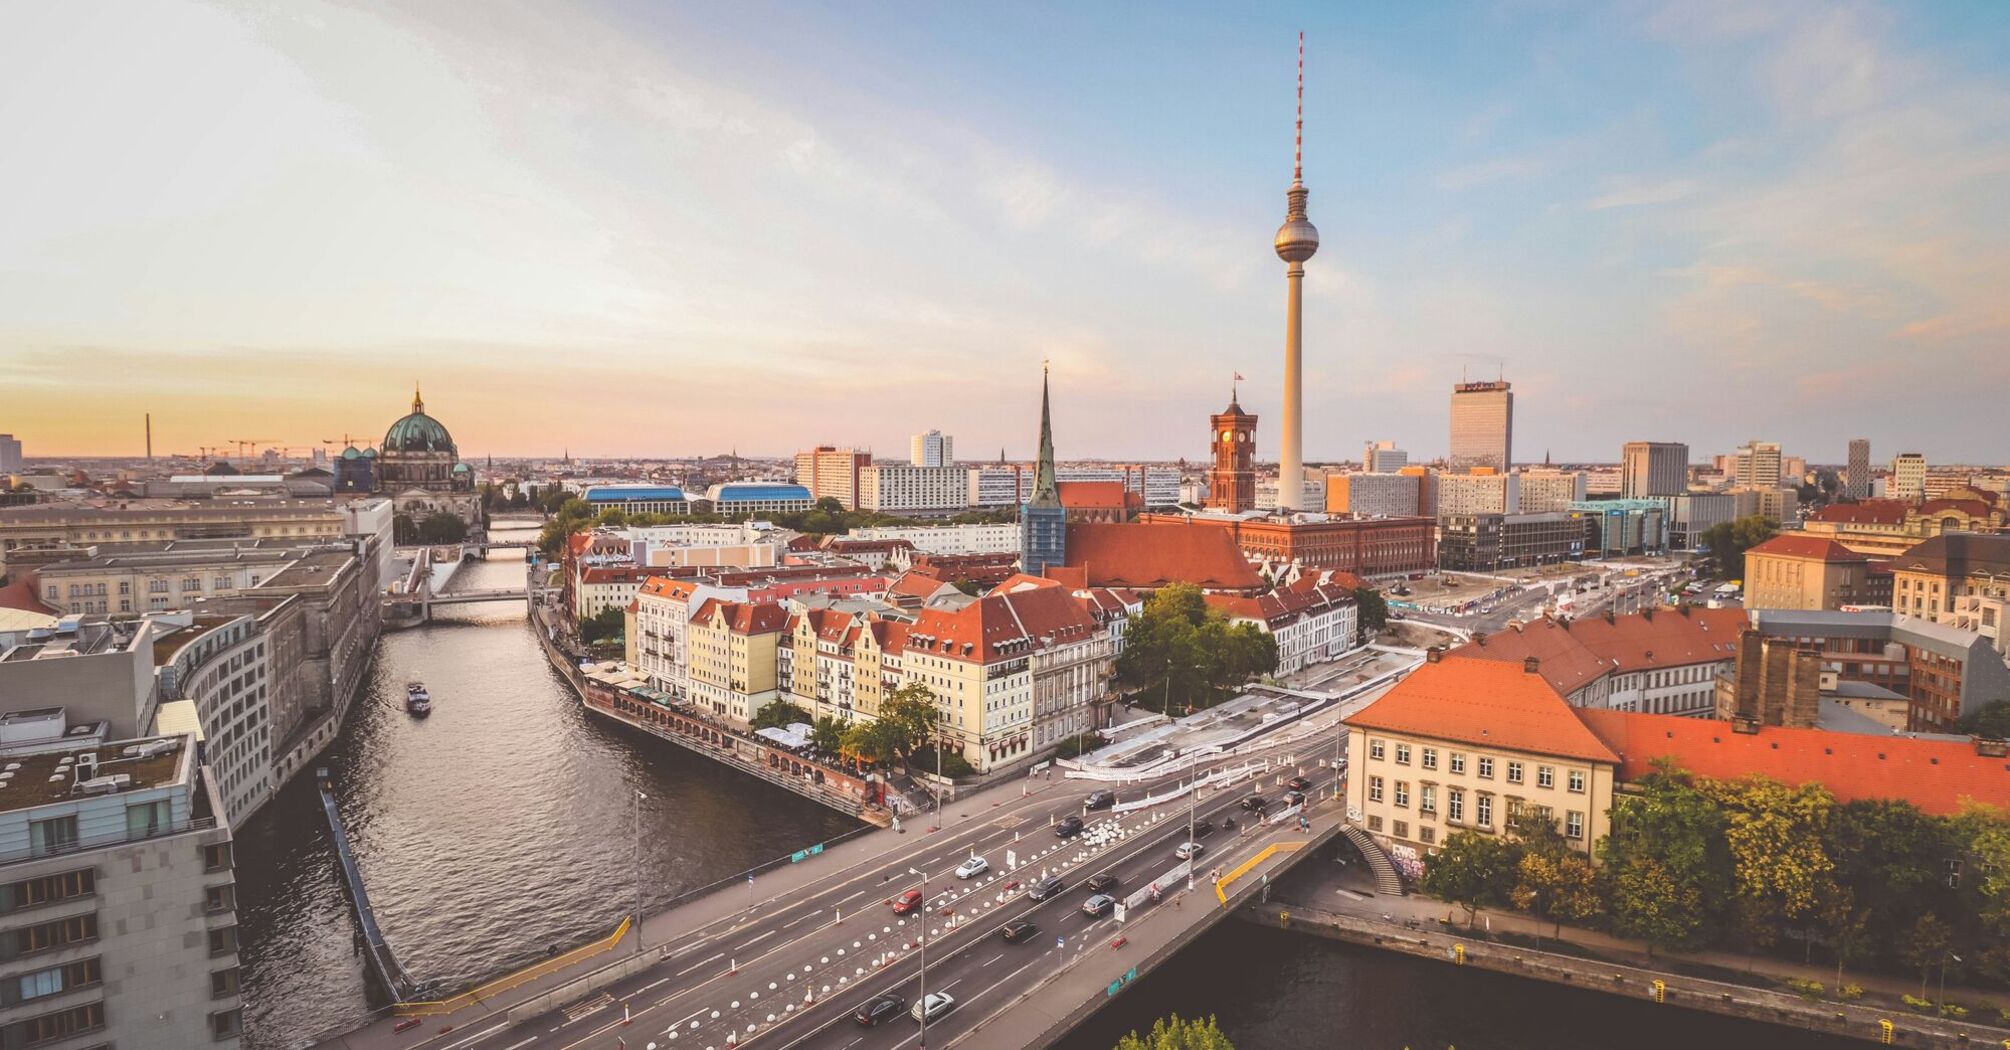 Aerial view of Berlin cityscape at sunset with the Spree River, iconic TV Tower, and cathedral visible